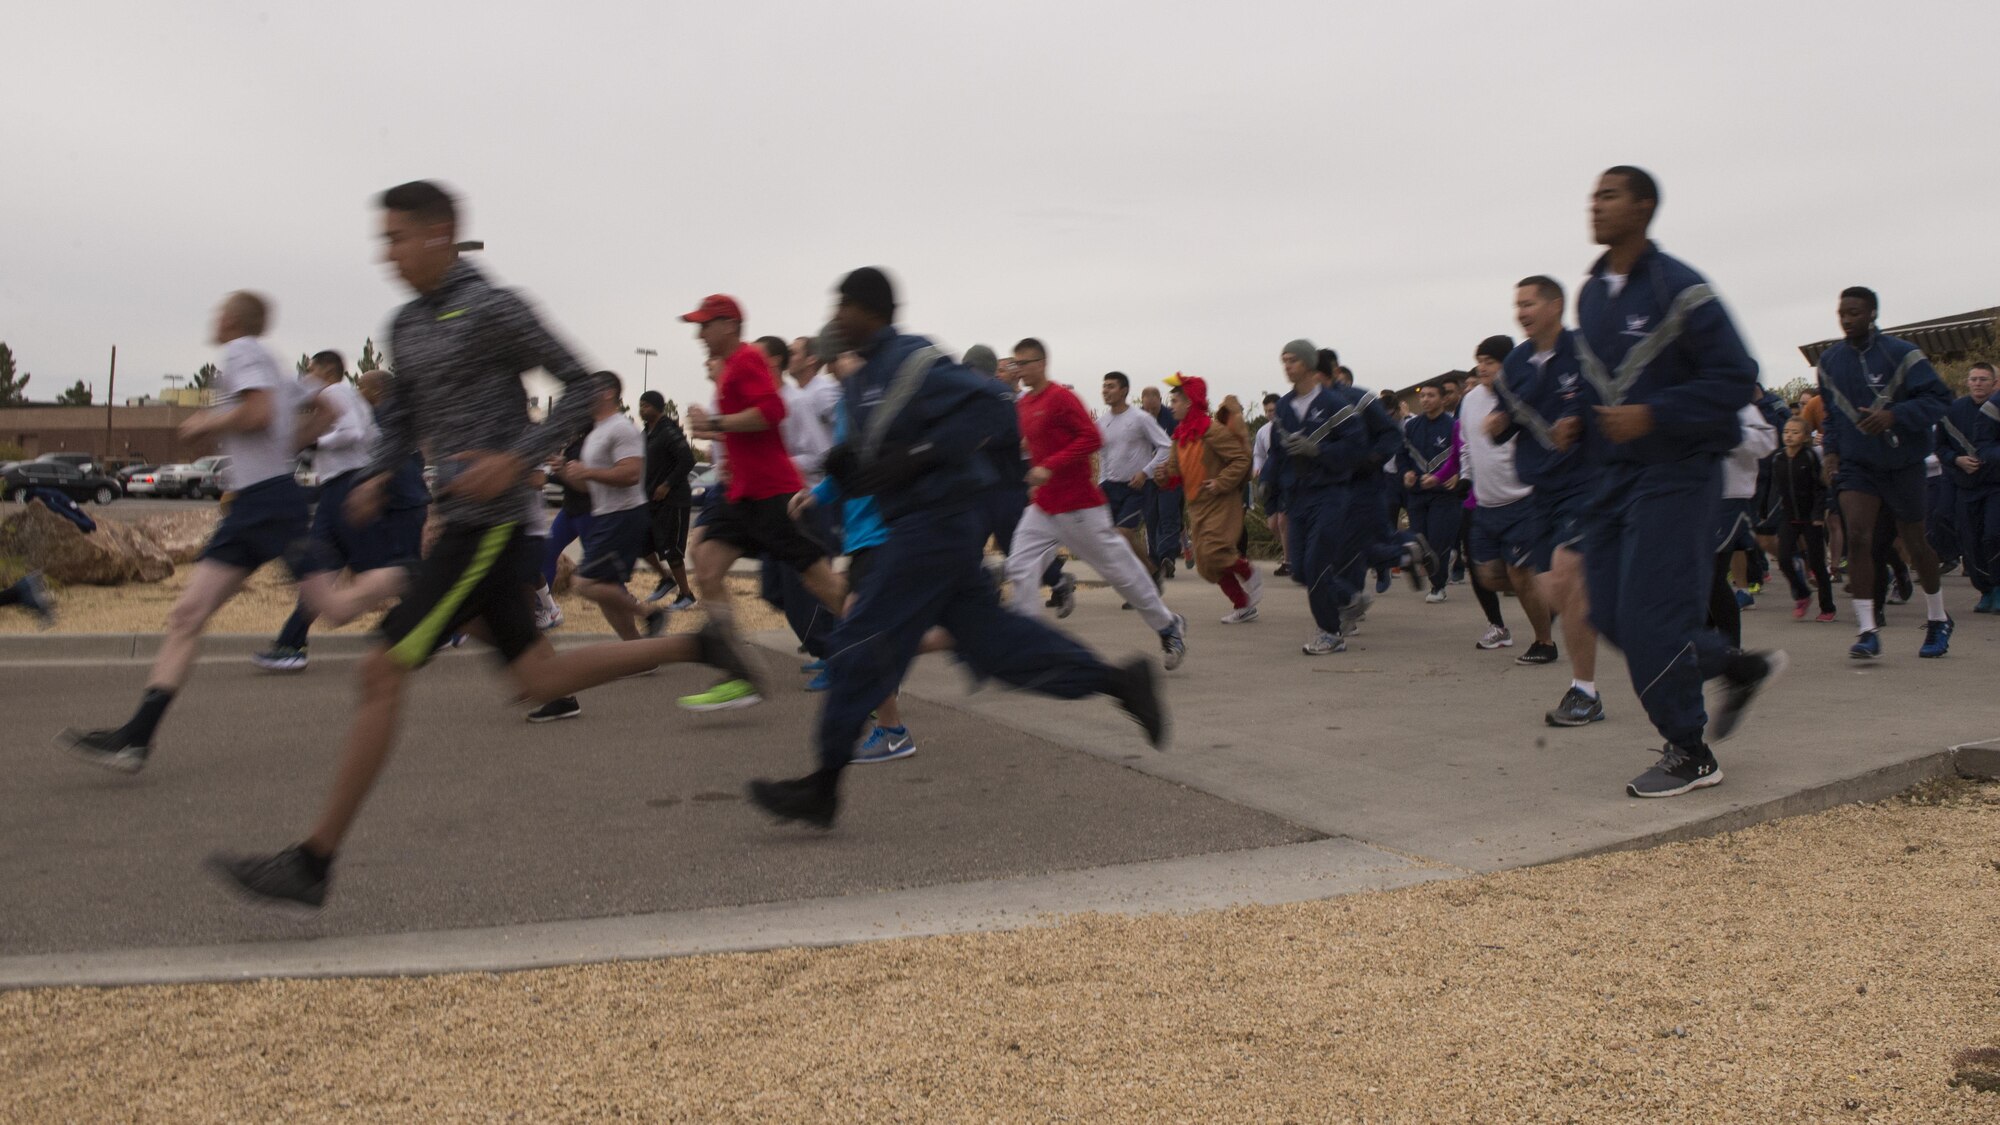 Participants race in the 49th Force Support Squadron’s annual Turkey Trot on Nov. 21, 2016 at Holloman Air Force Base, N.M. 150 Airmen and their families competed in the race. (U.S. Air Force photo by Airman 1st Class Alexis P. Docherty) 